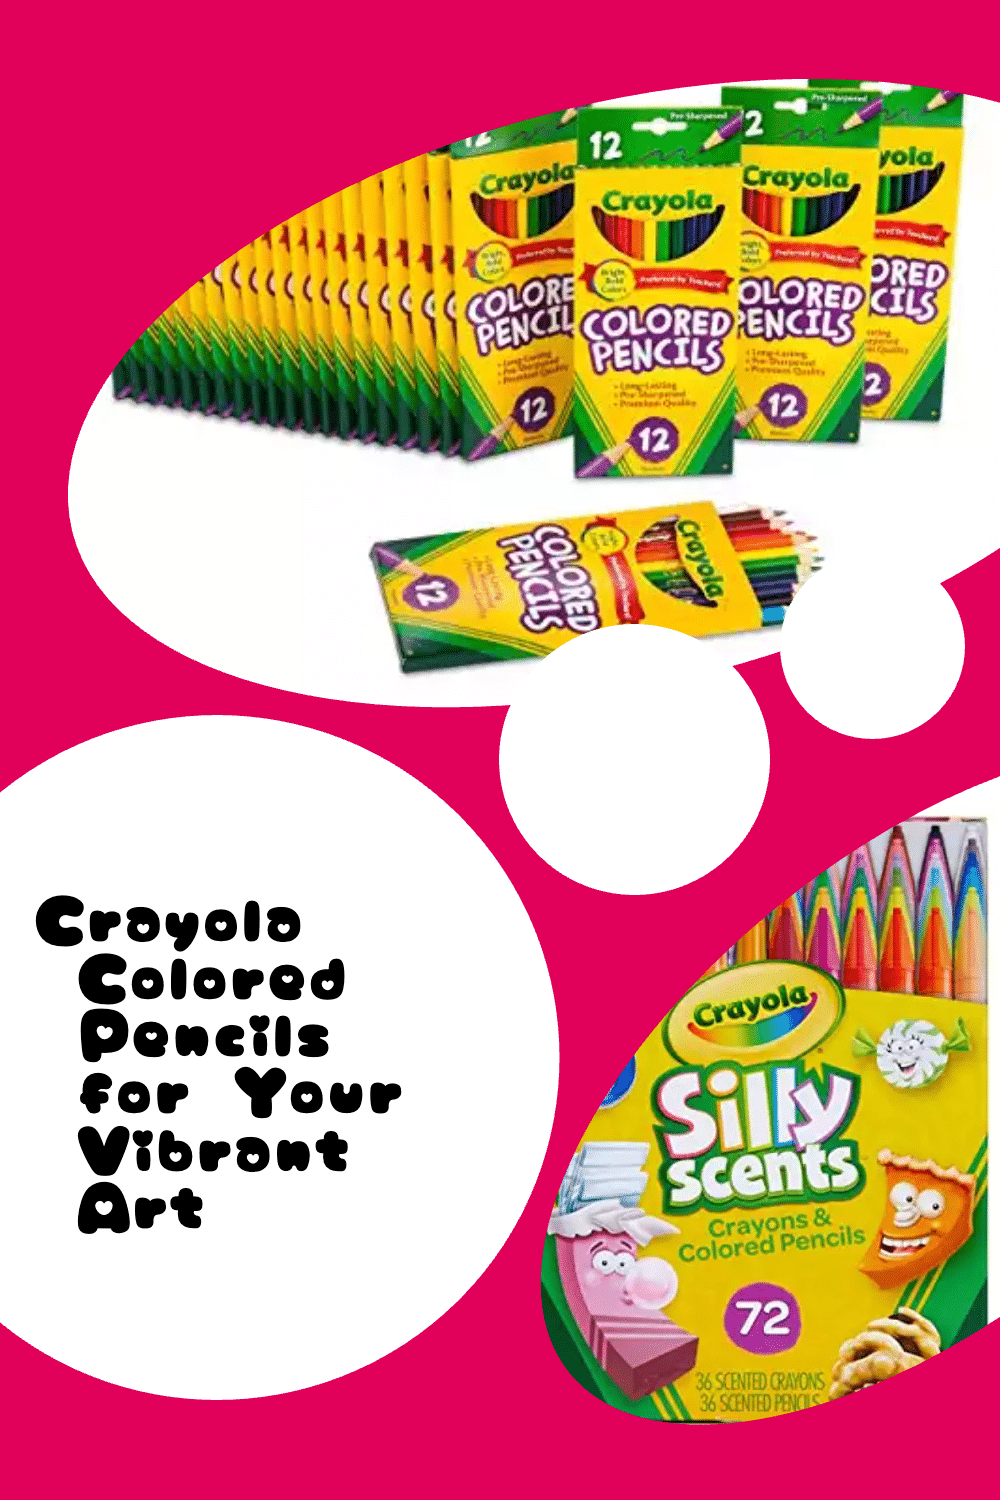 Crayola Twistables Silly Scents Colored Pencils, Scented - 12 pencils